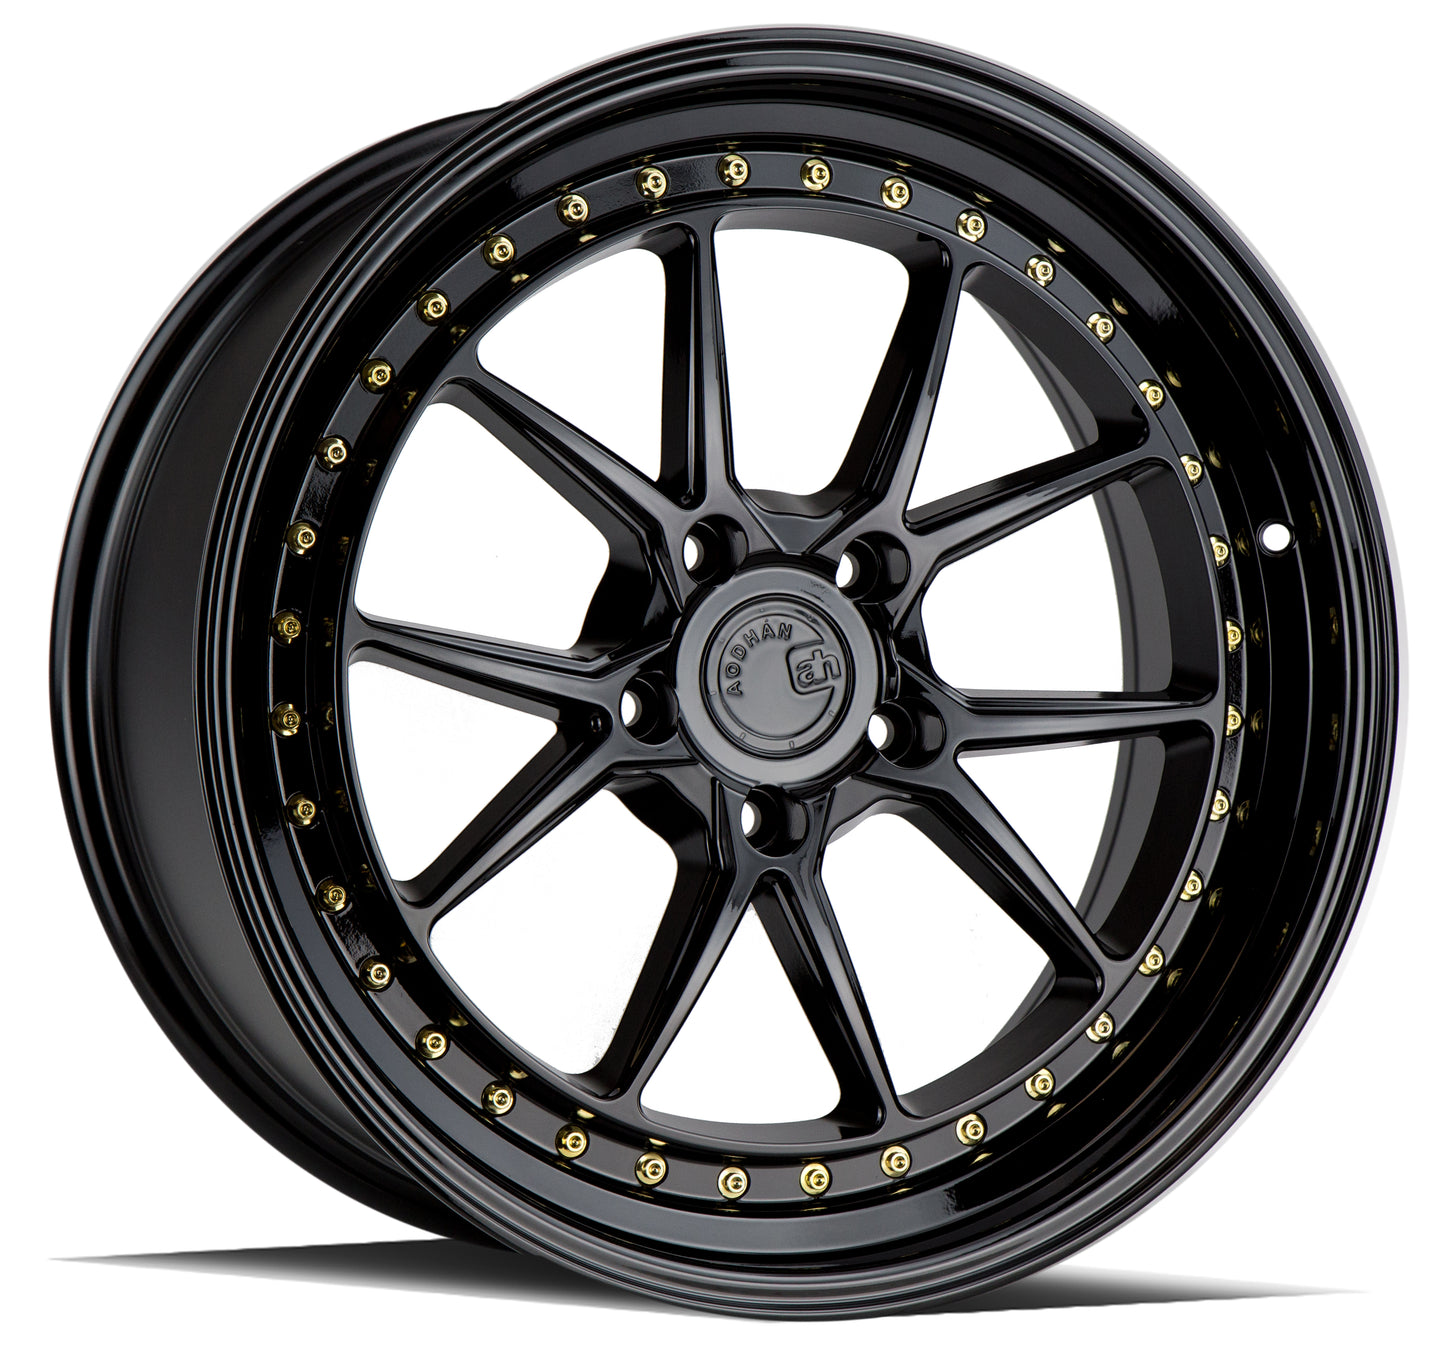 18" Aodhan DS08 Gloss Black w/ Gold Rivets 5x100 ( Staggered Setup )